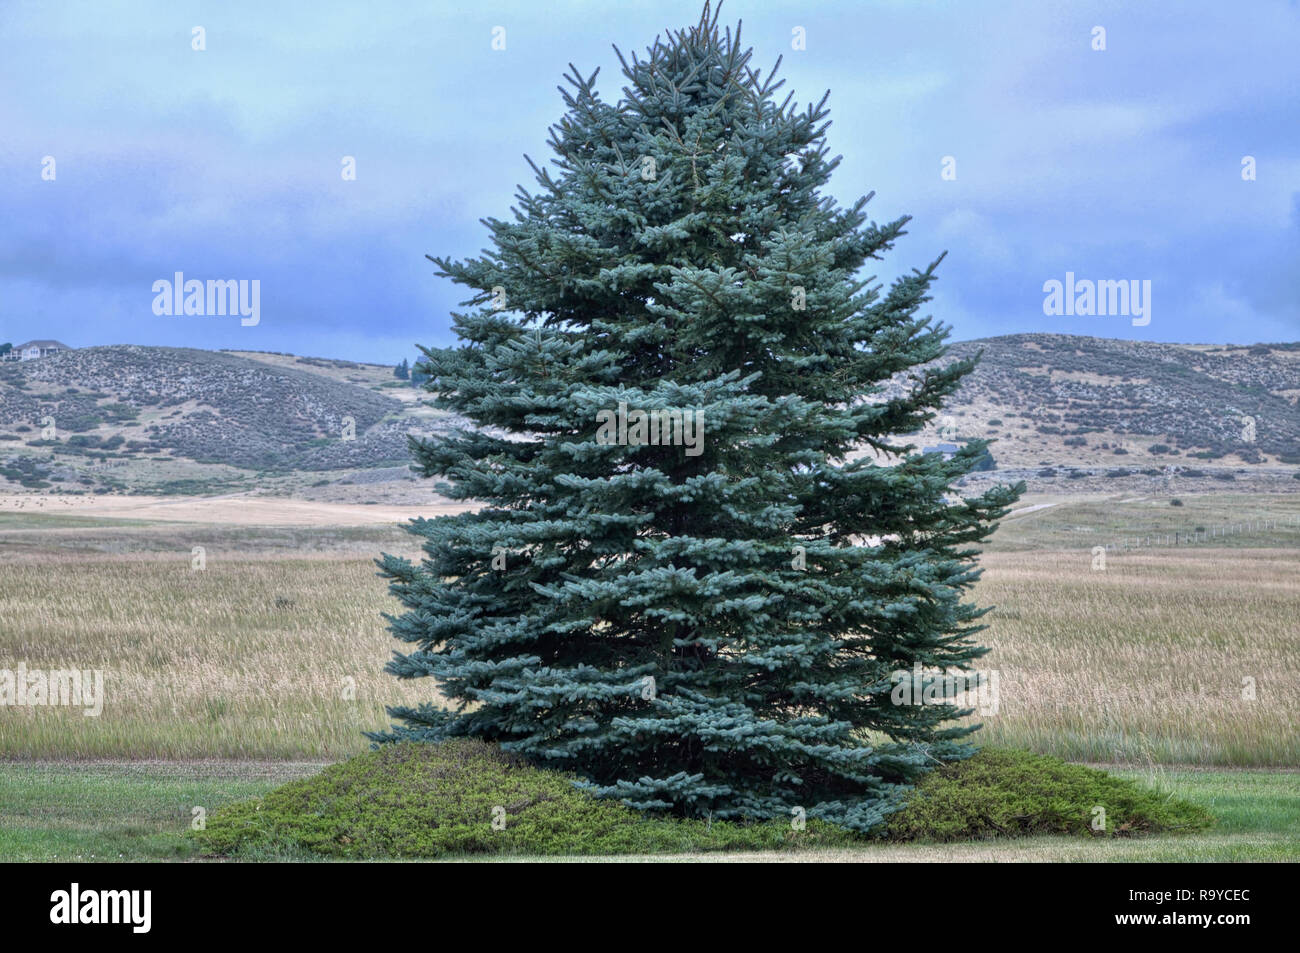 An individual evergreen Blue Spruce grows on the edge of a high elevation grassland near the foothills of the Colorado Rocky Mountains. Stock Photo